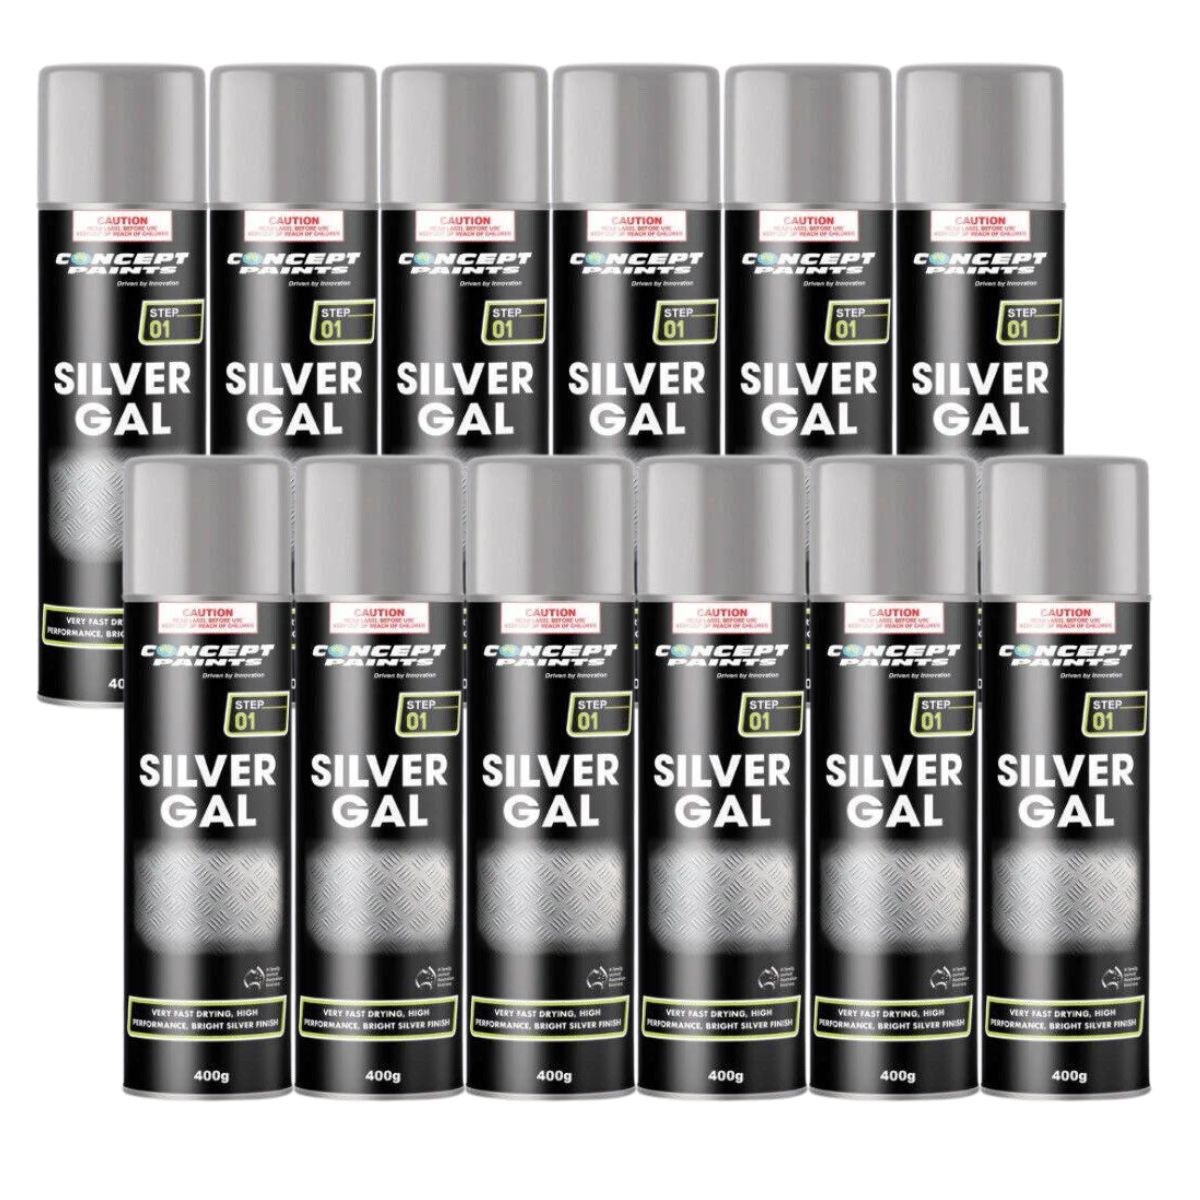 Concept Paints Silver Gal 400g (12 Cans) - South East Clearance Centre